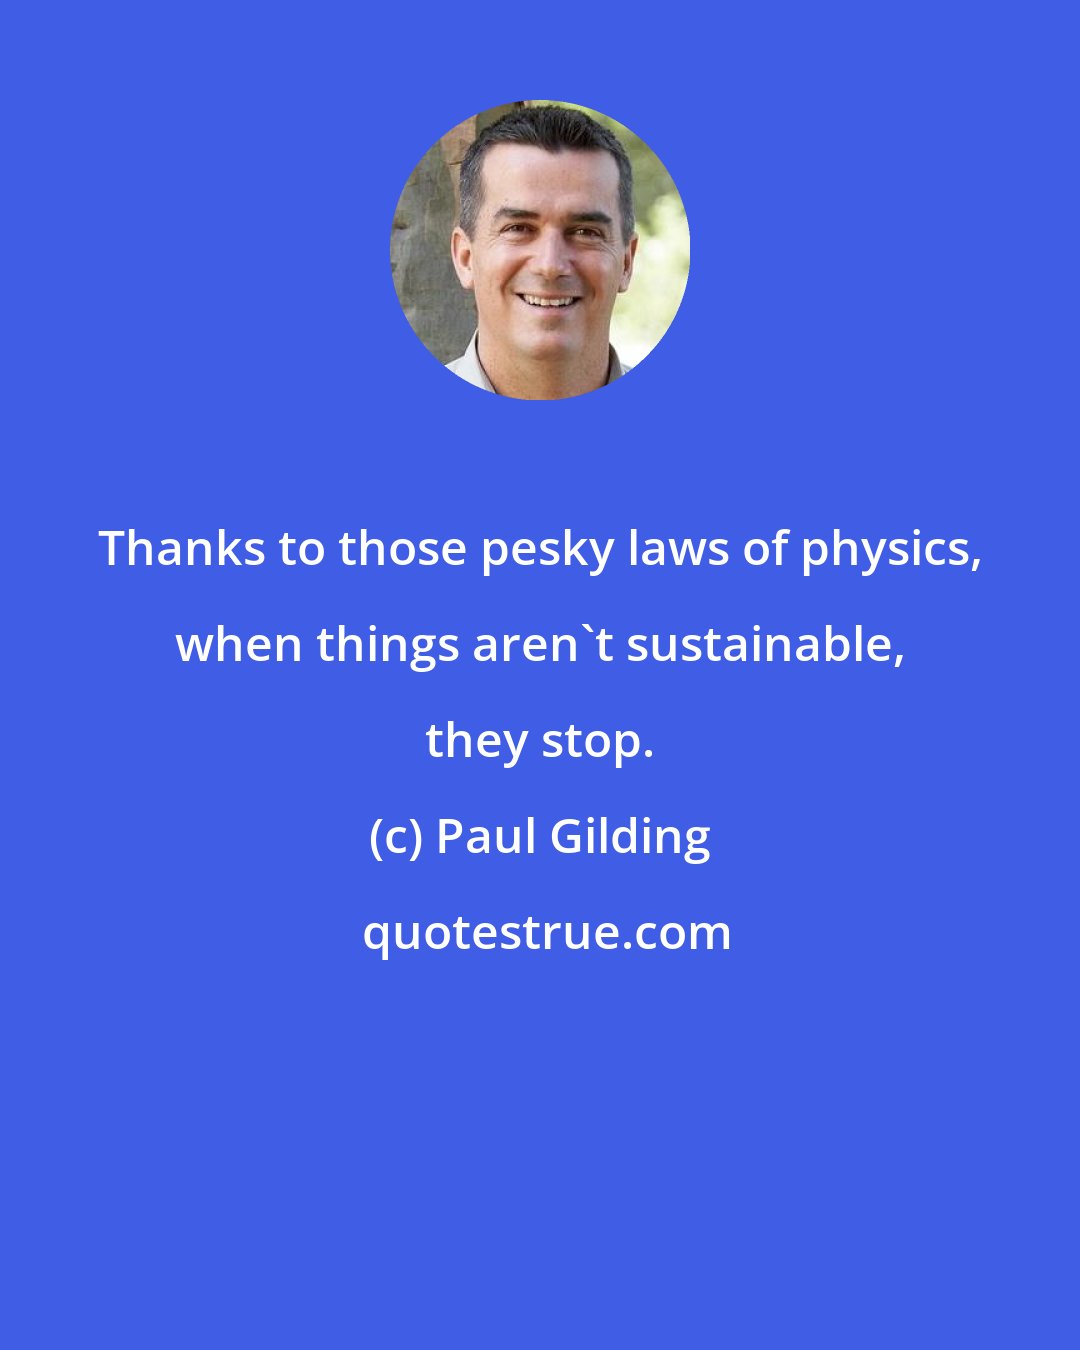 Paul Gilding: Thanks to those pesky laws of physics, when things aren't sustainable, they stop.